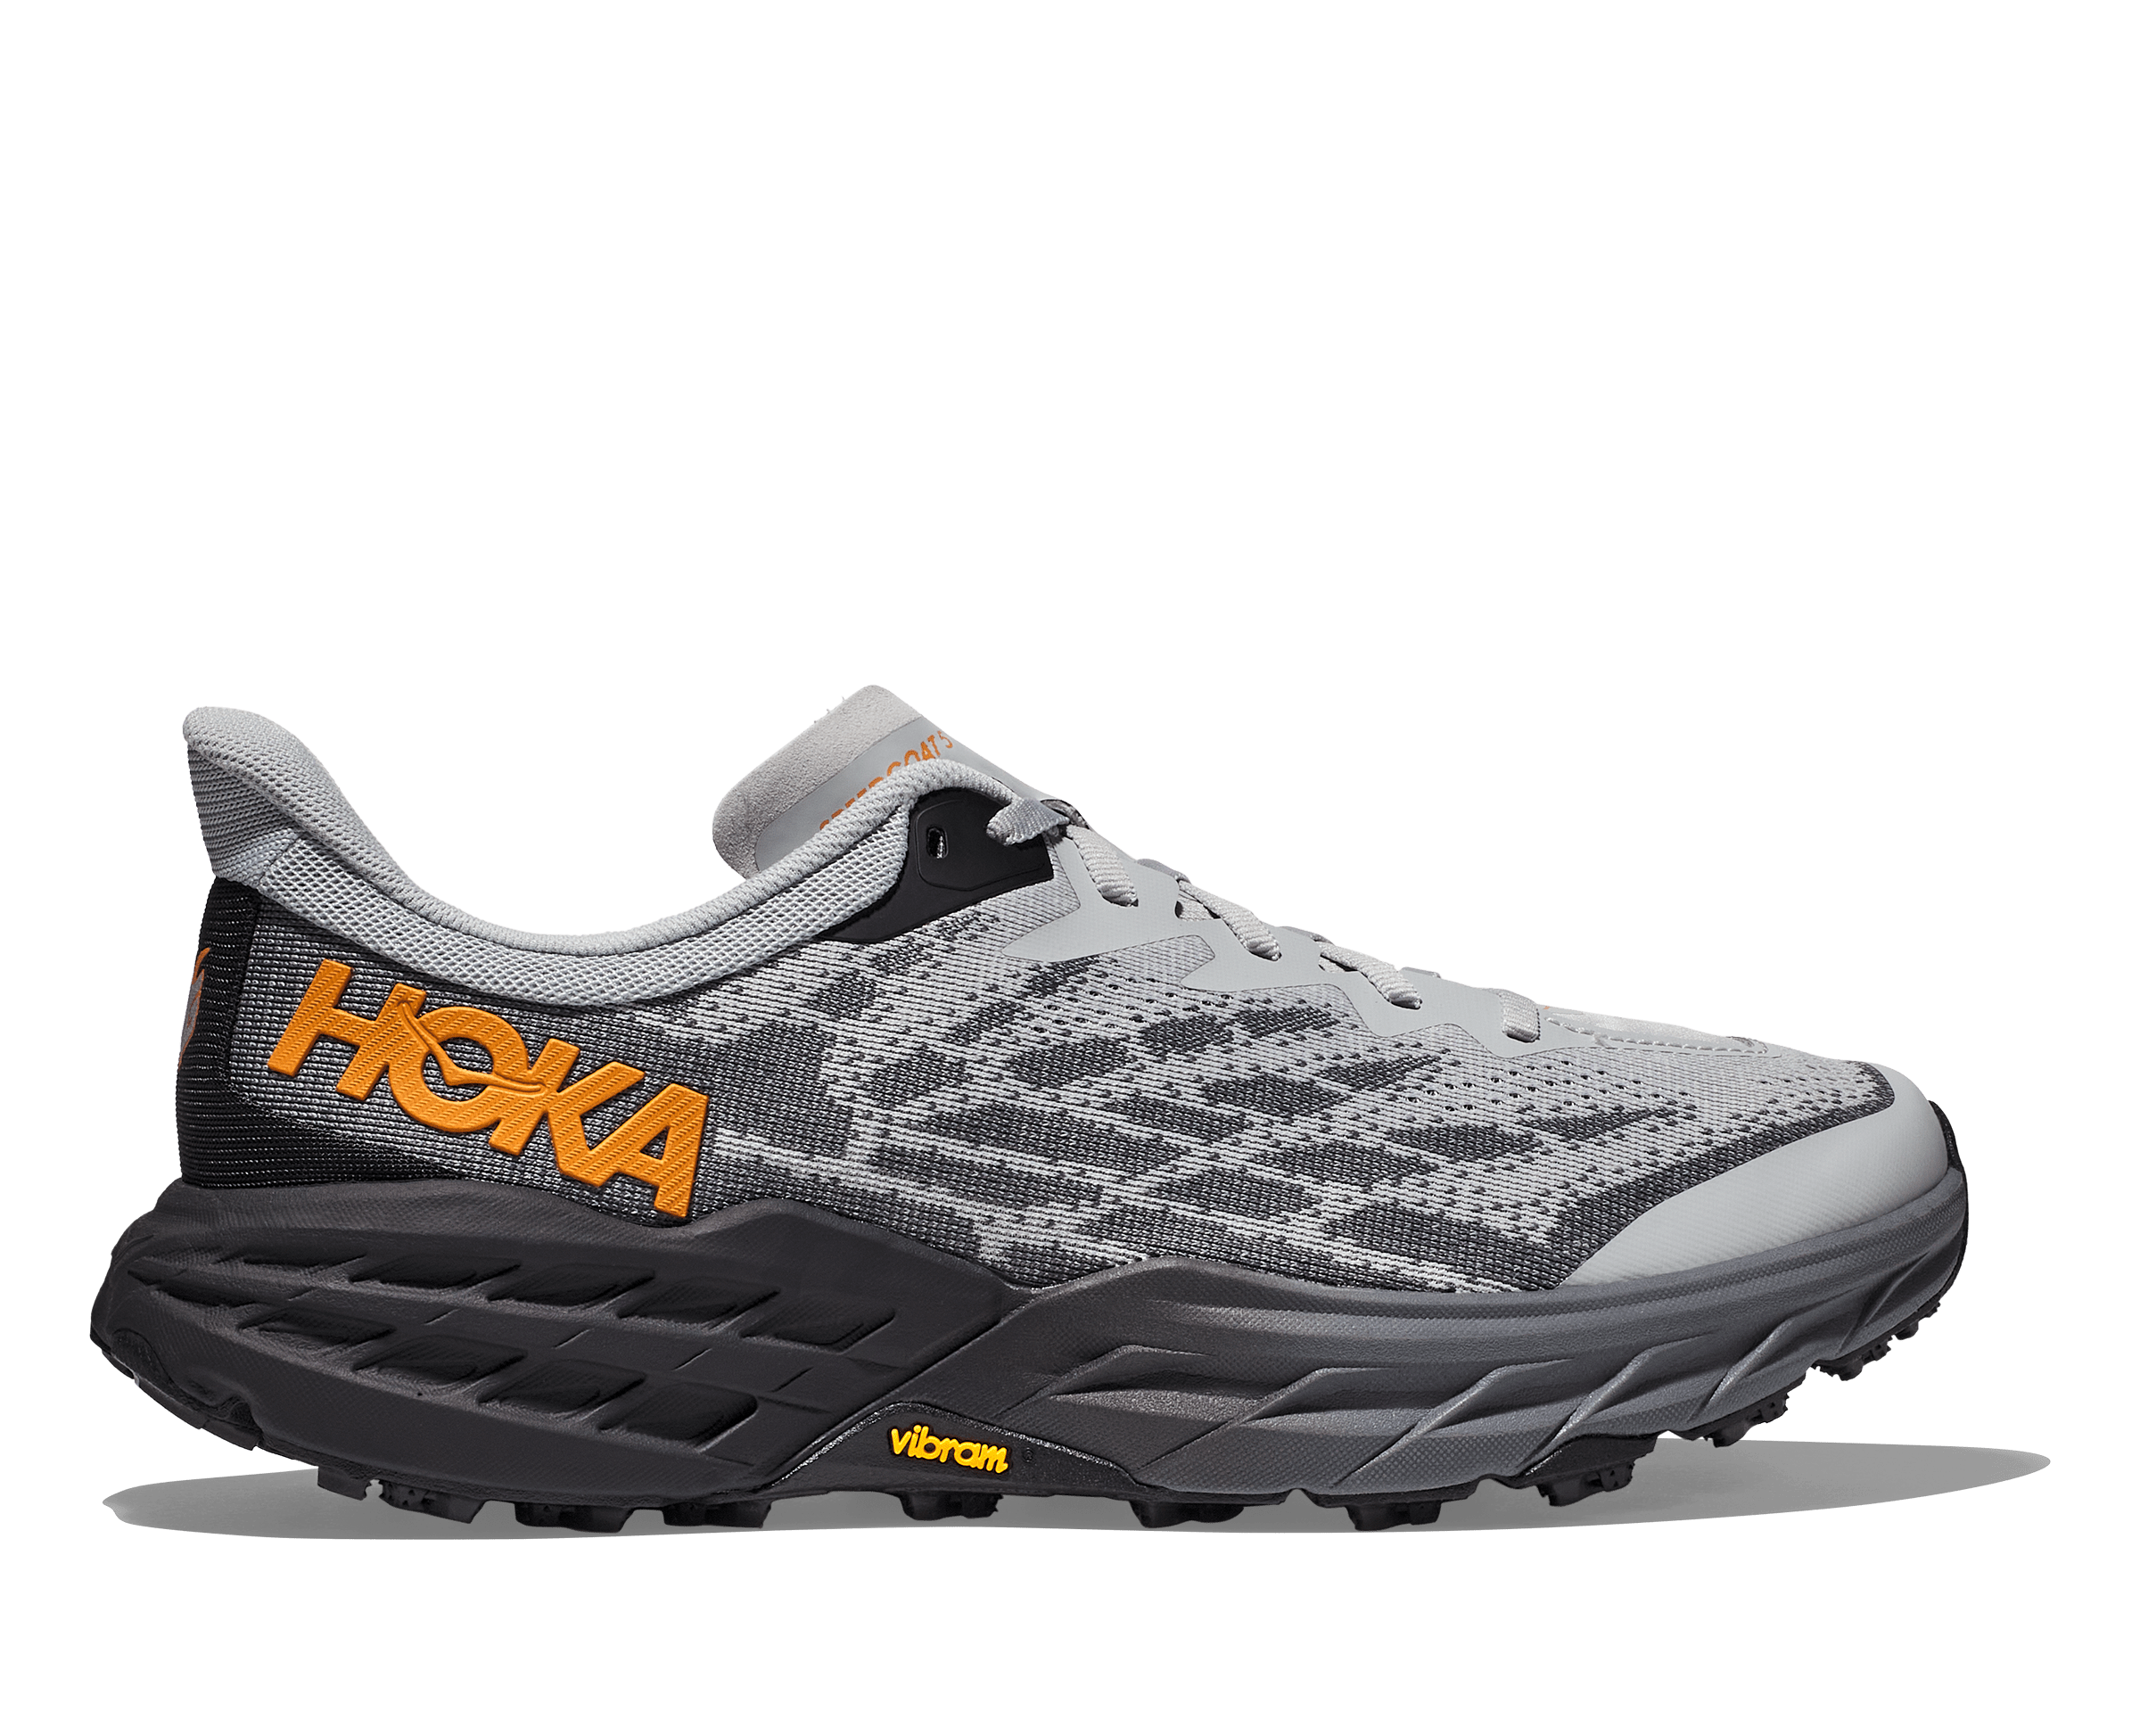 Lateral view of the Men's Speedgoat 5 by HOKA in Harbor Mist/Black